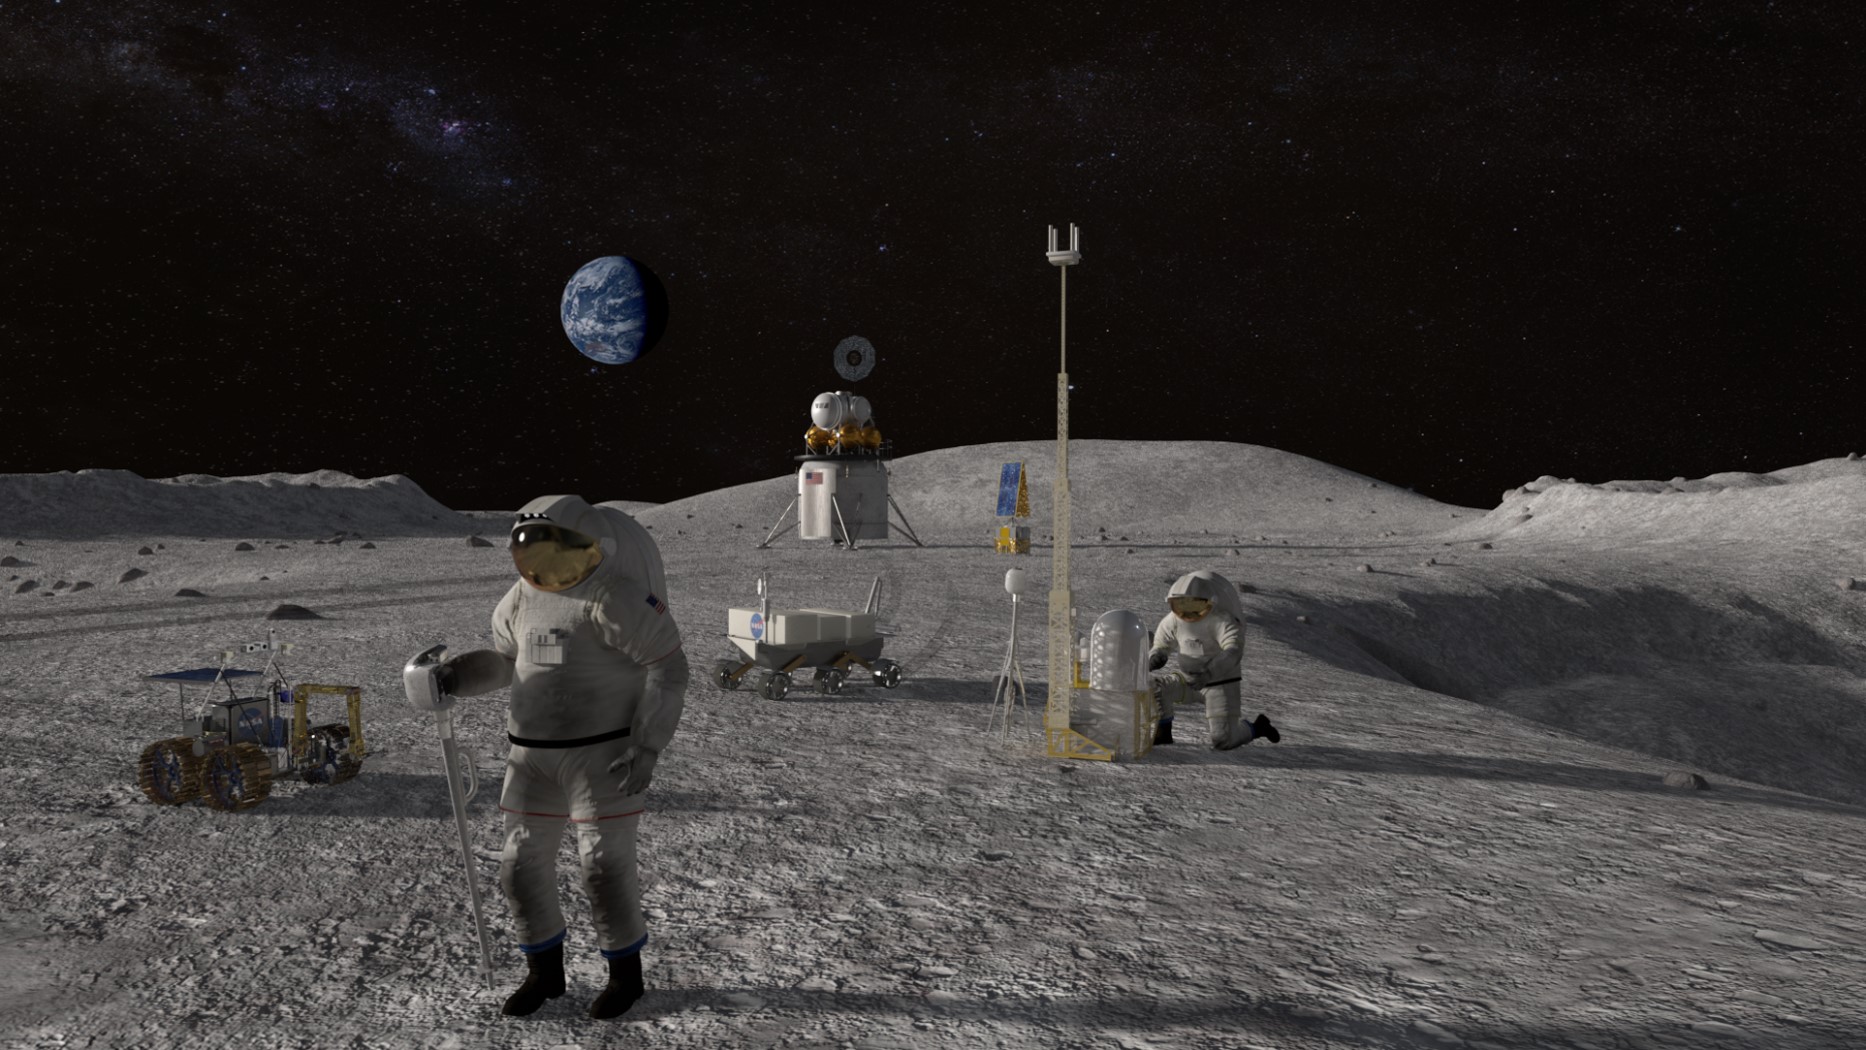 Astronauts on the surface of the moon with the background of Earth